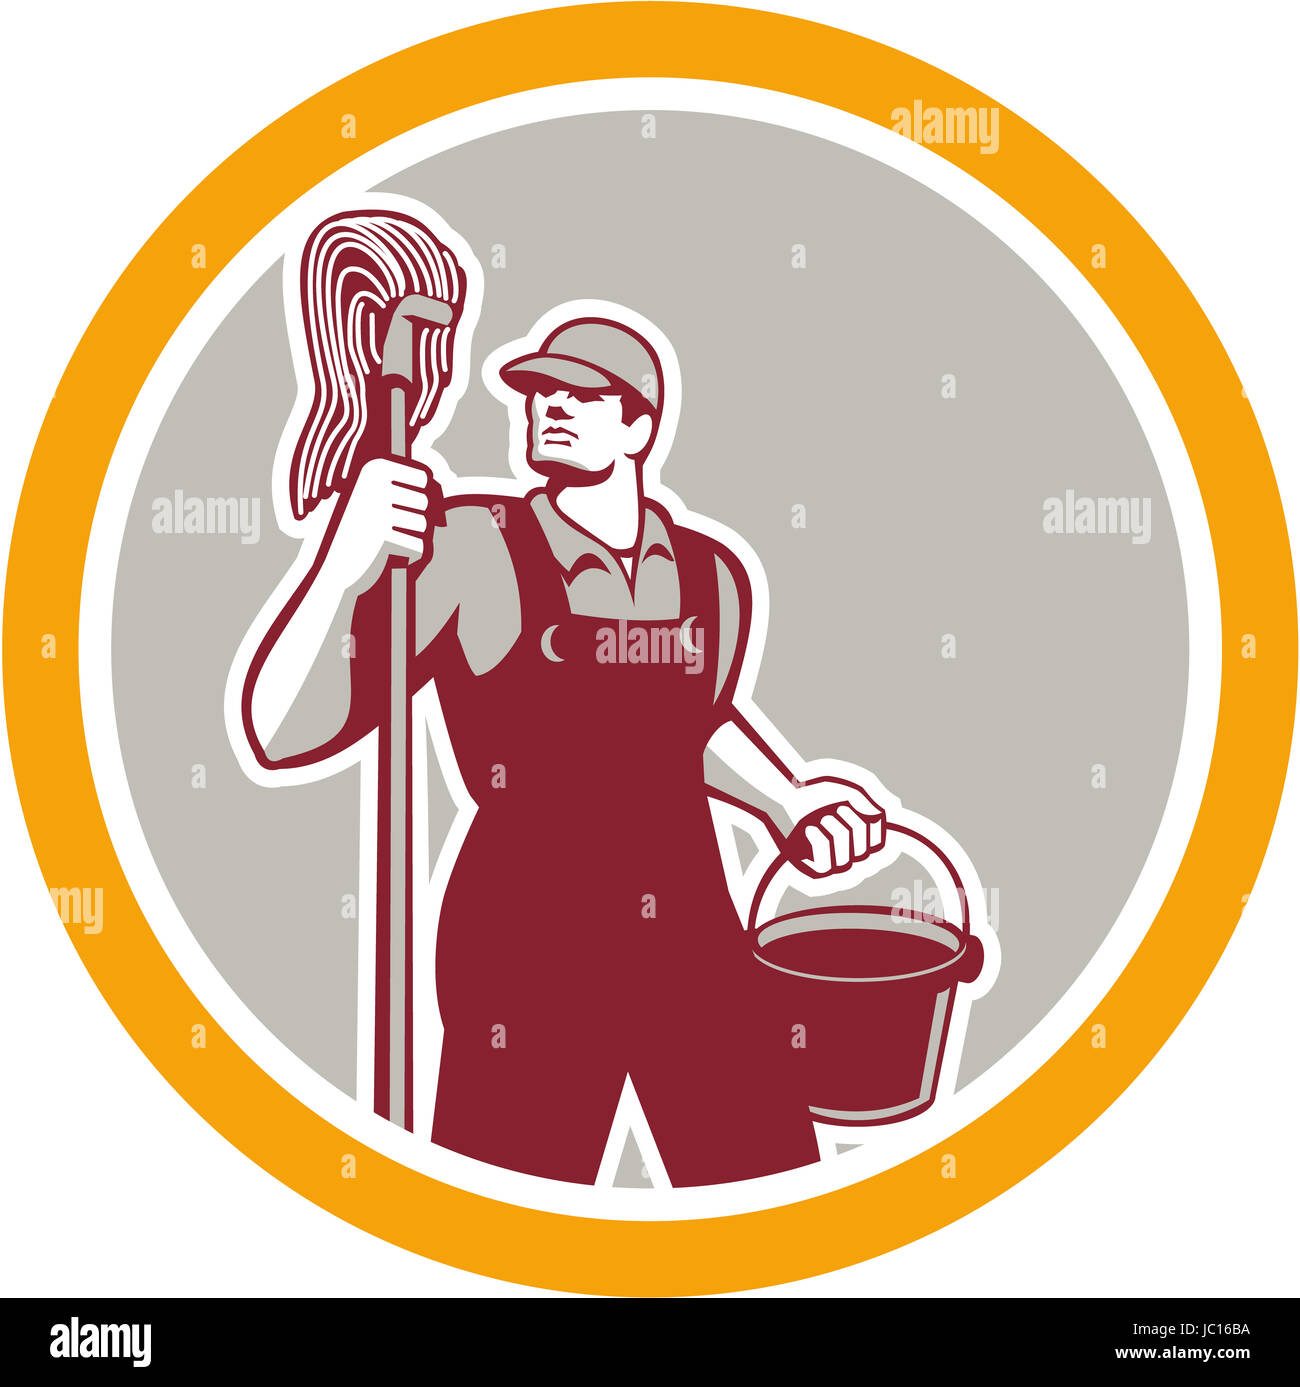 Illustration of a janitor cleaner worker holding mop and water bucket pail viewed from front set inside circle on isolated background done in retro style. Stock Photo